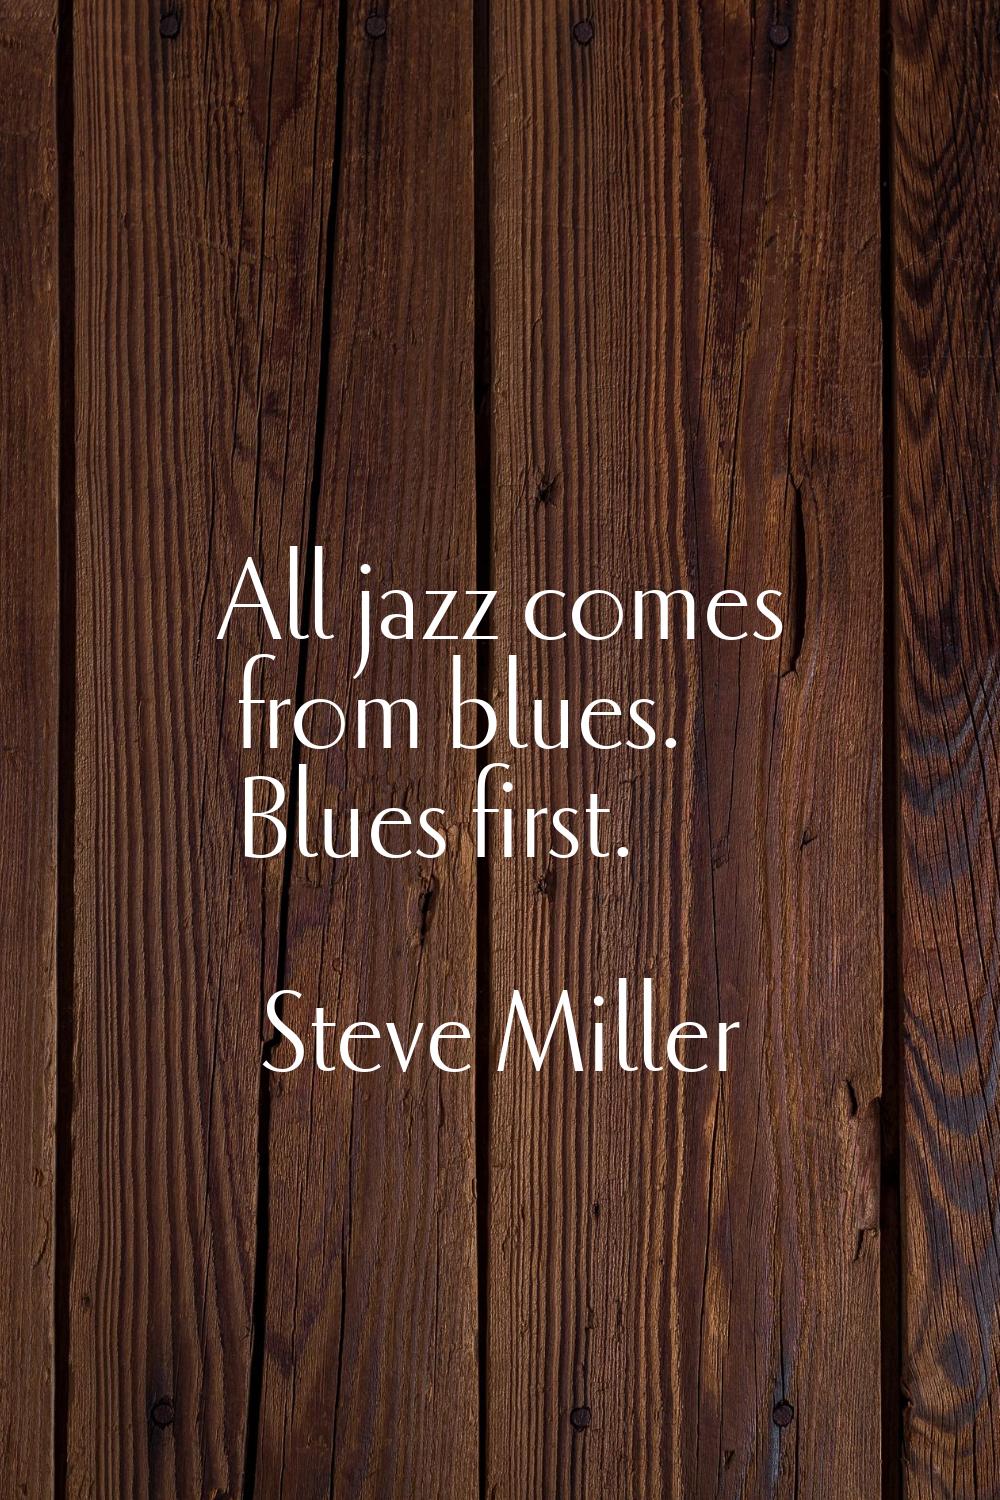 All jazz comes from blues. Blues first.